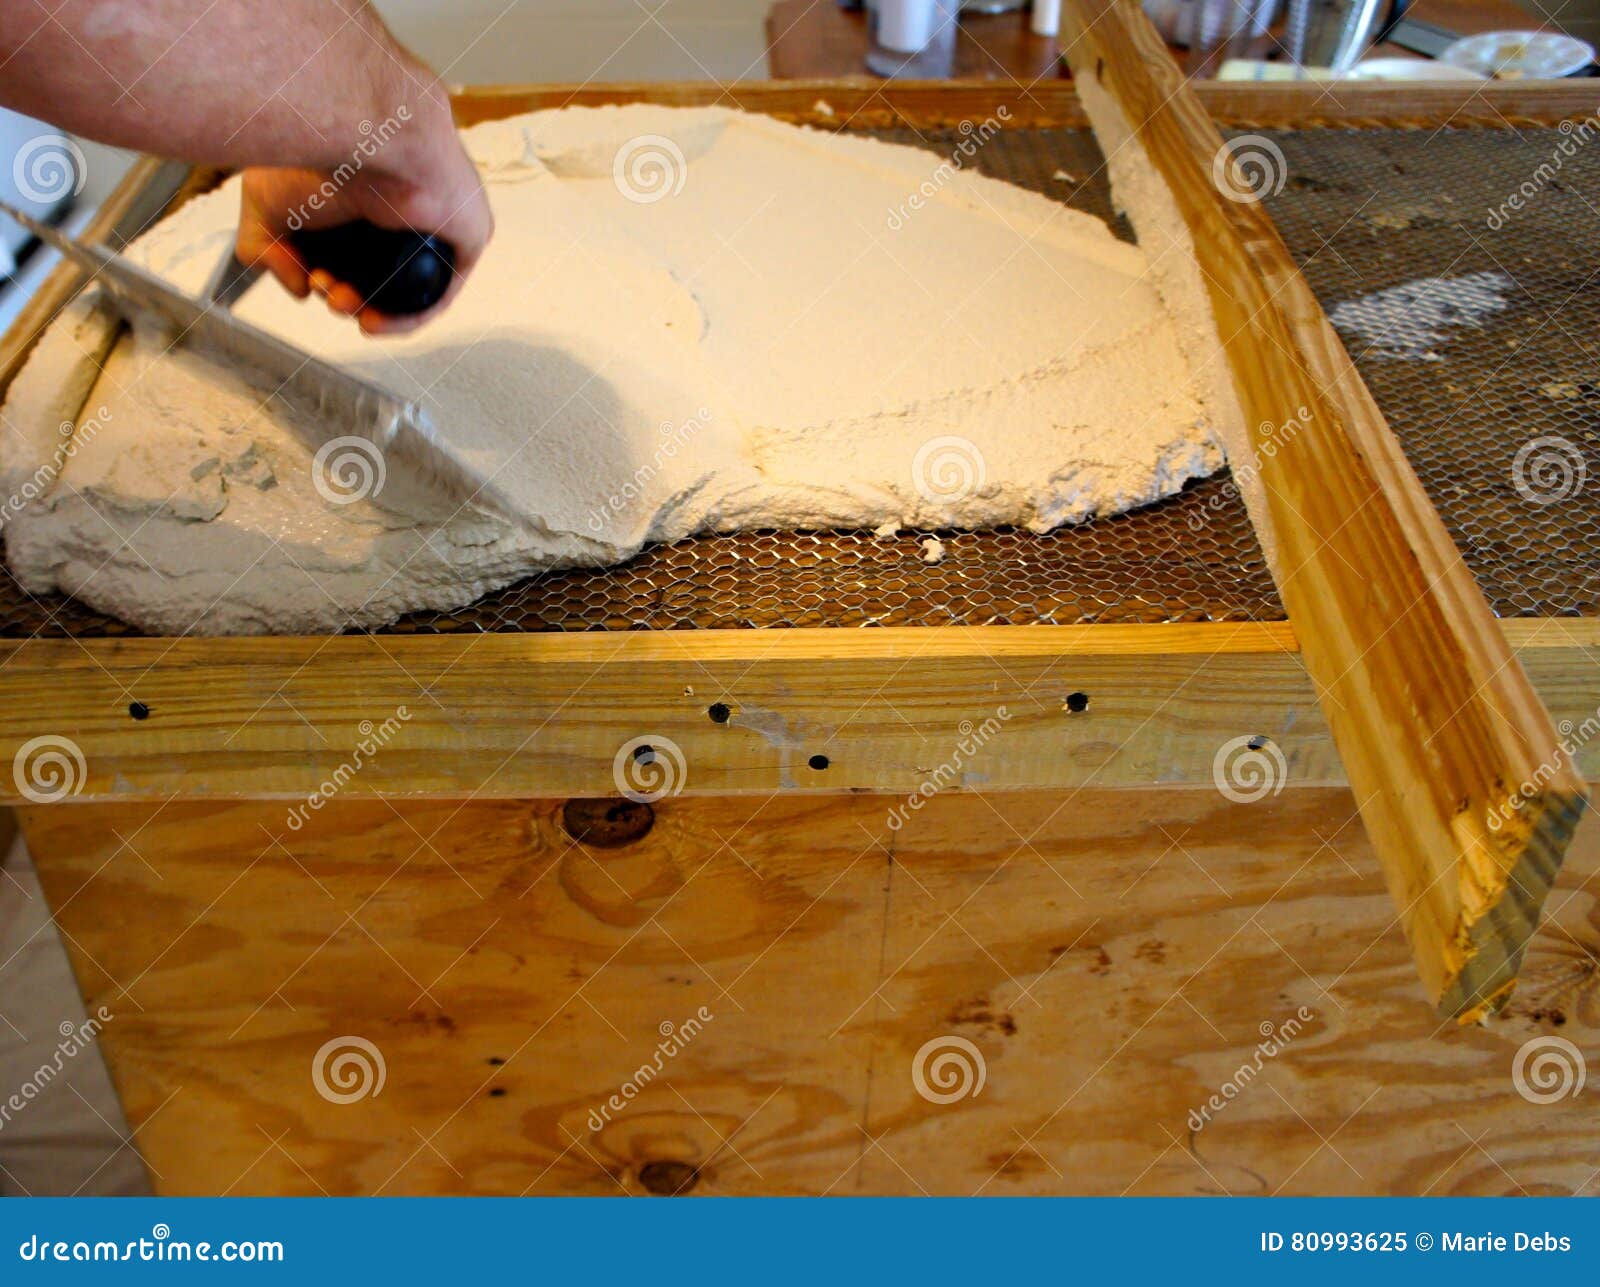 Making Of A Concrete Countertop Stock Image Image Of Countertop